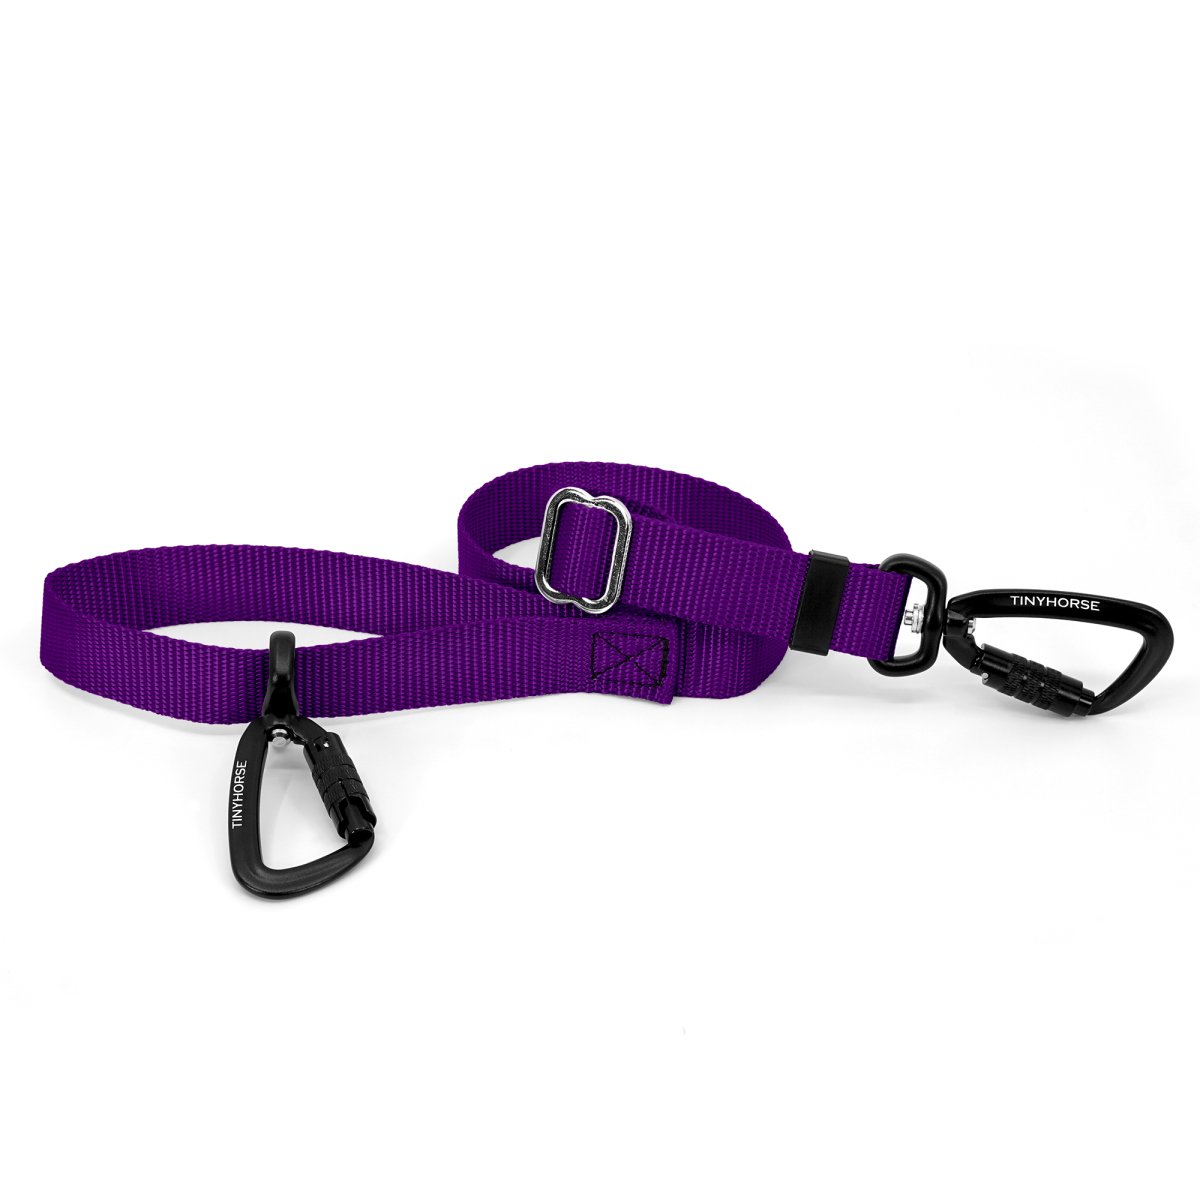 A purple-coloured Lead-All Lite with an adjustable nylon webbing leash and 2 auto-locking carabiners